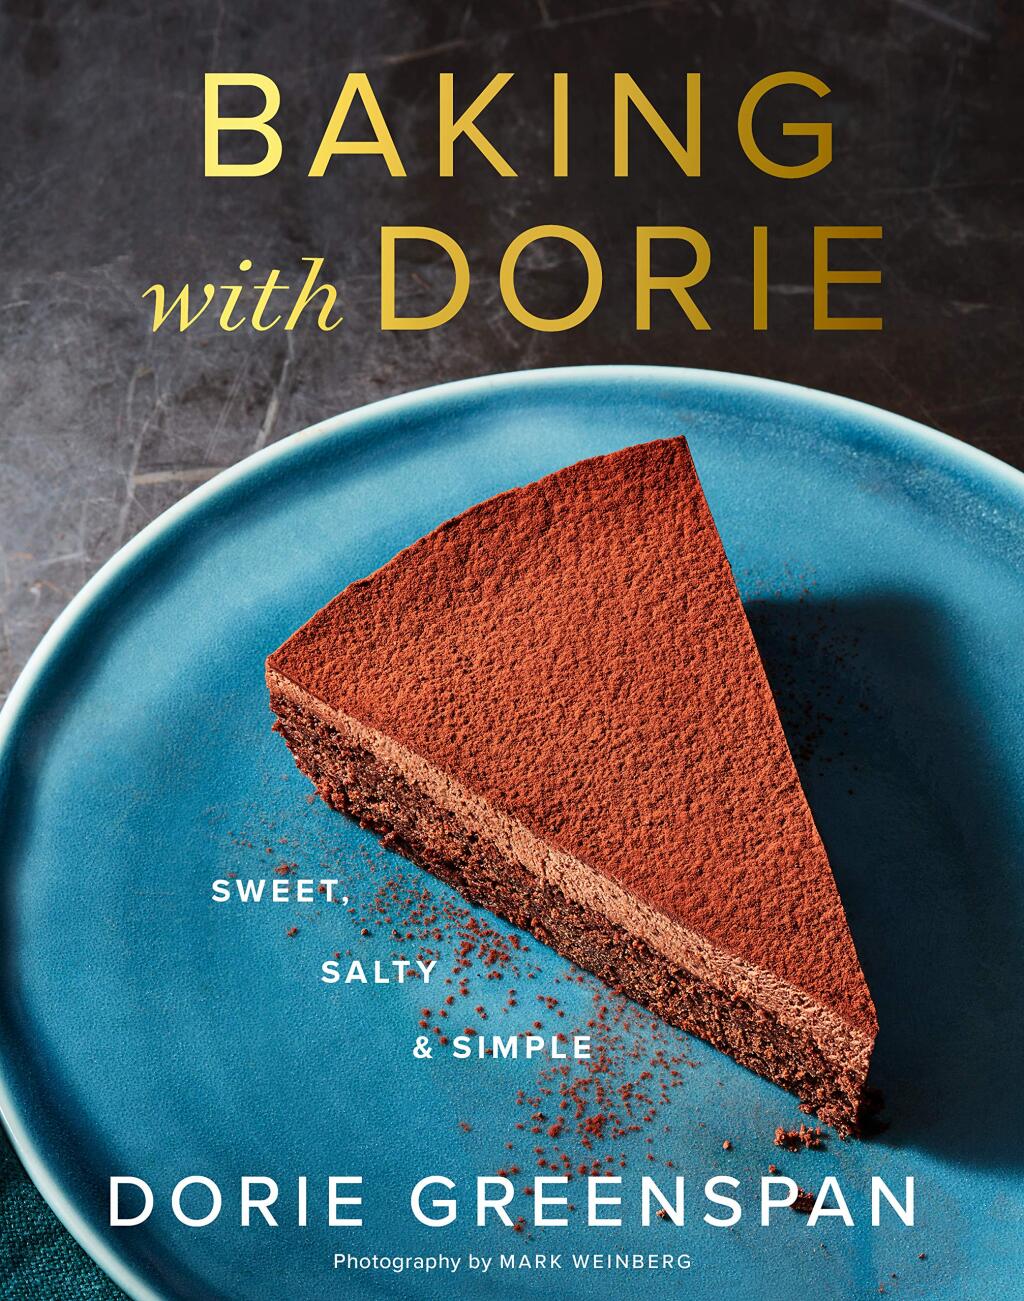 “Baking with Dorie, Sweet, Salty, and Simple“ by Dorie Greenspan.